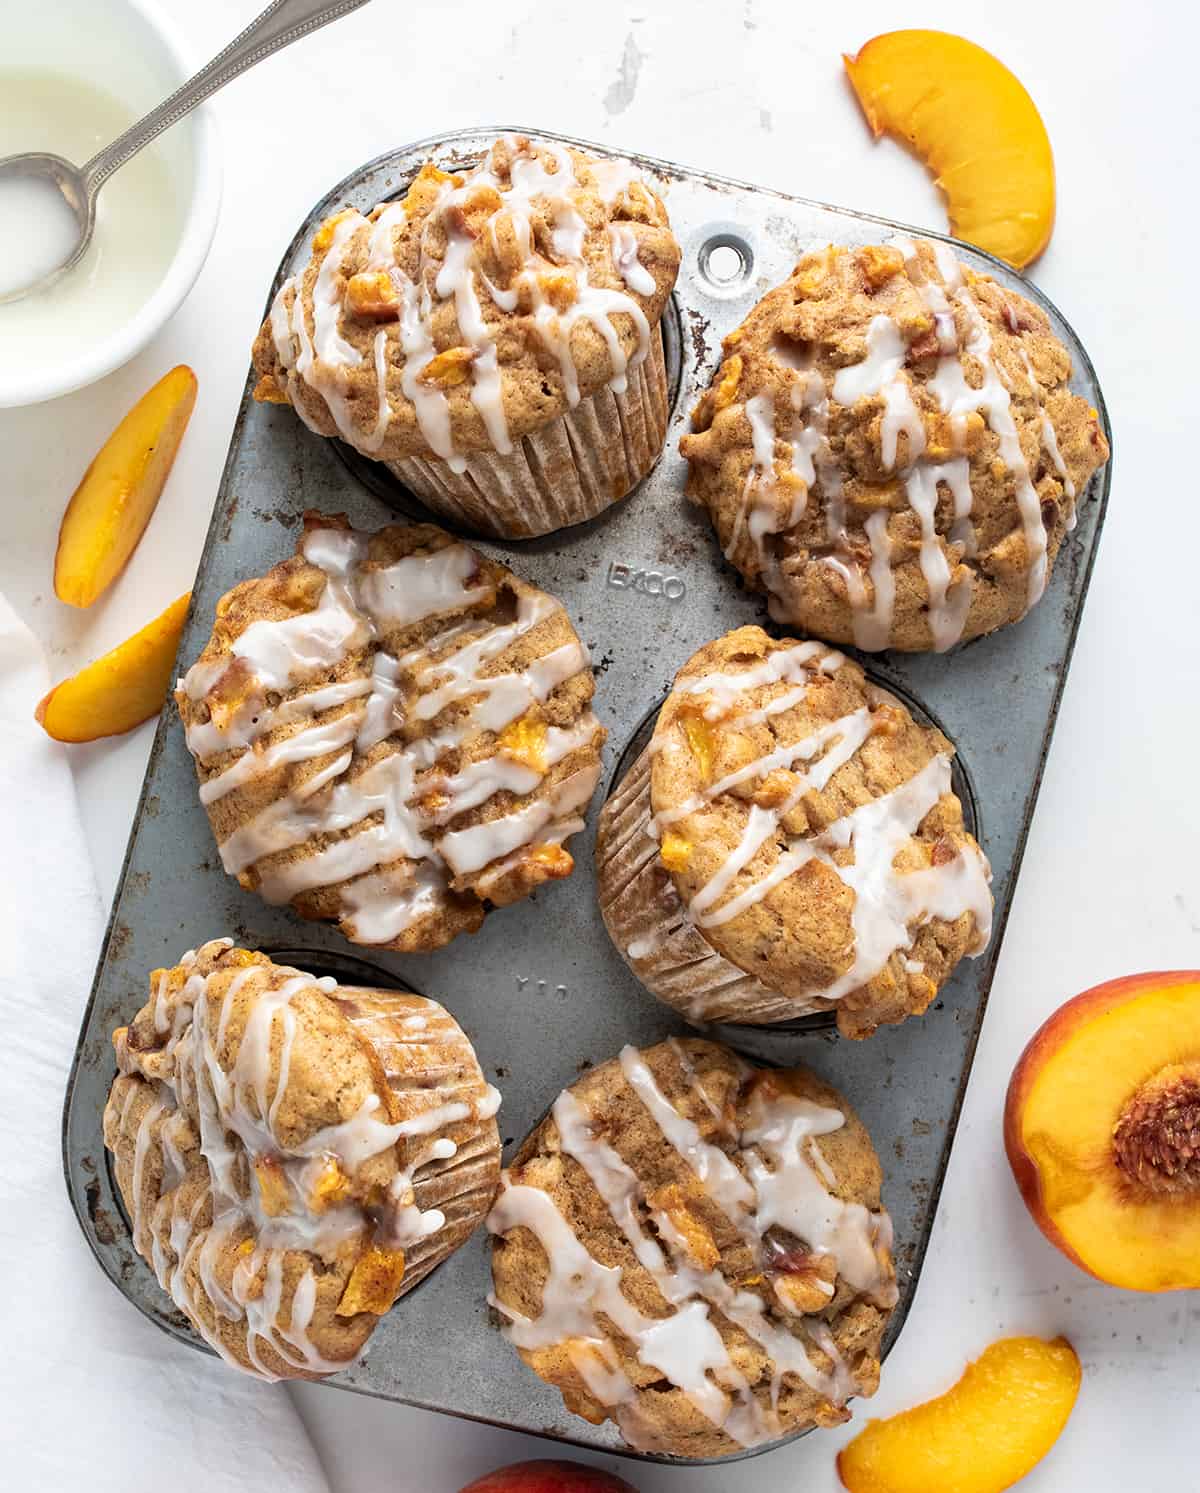 Peach Muffins in a Muffin Tin Next to Peaches on a White Counter.